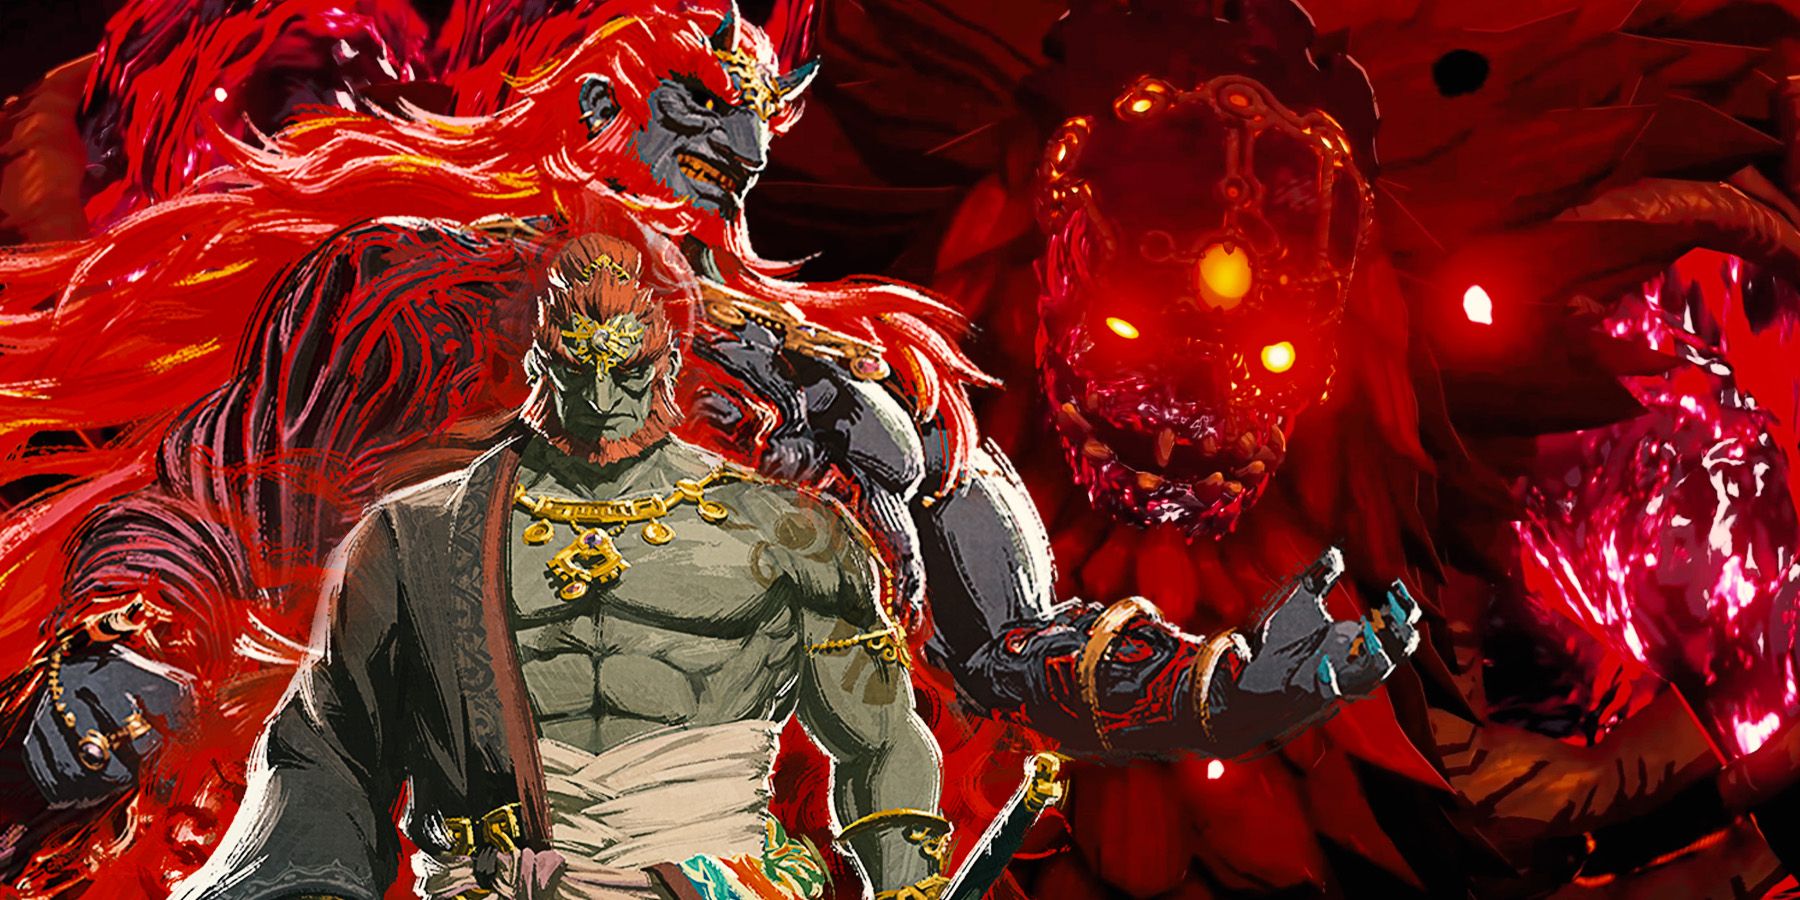 Image collage of Ganon and Ganondorf from The Legend of Zelda: Breath of the Wild and Tears of the Kingdom.